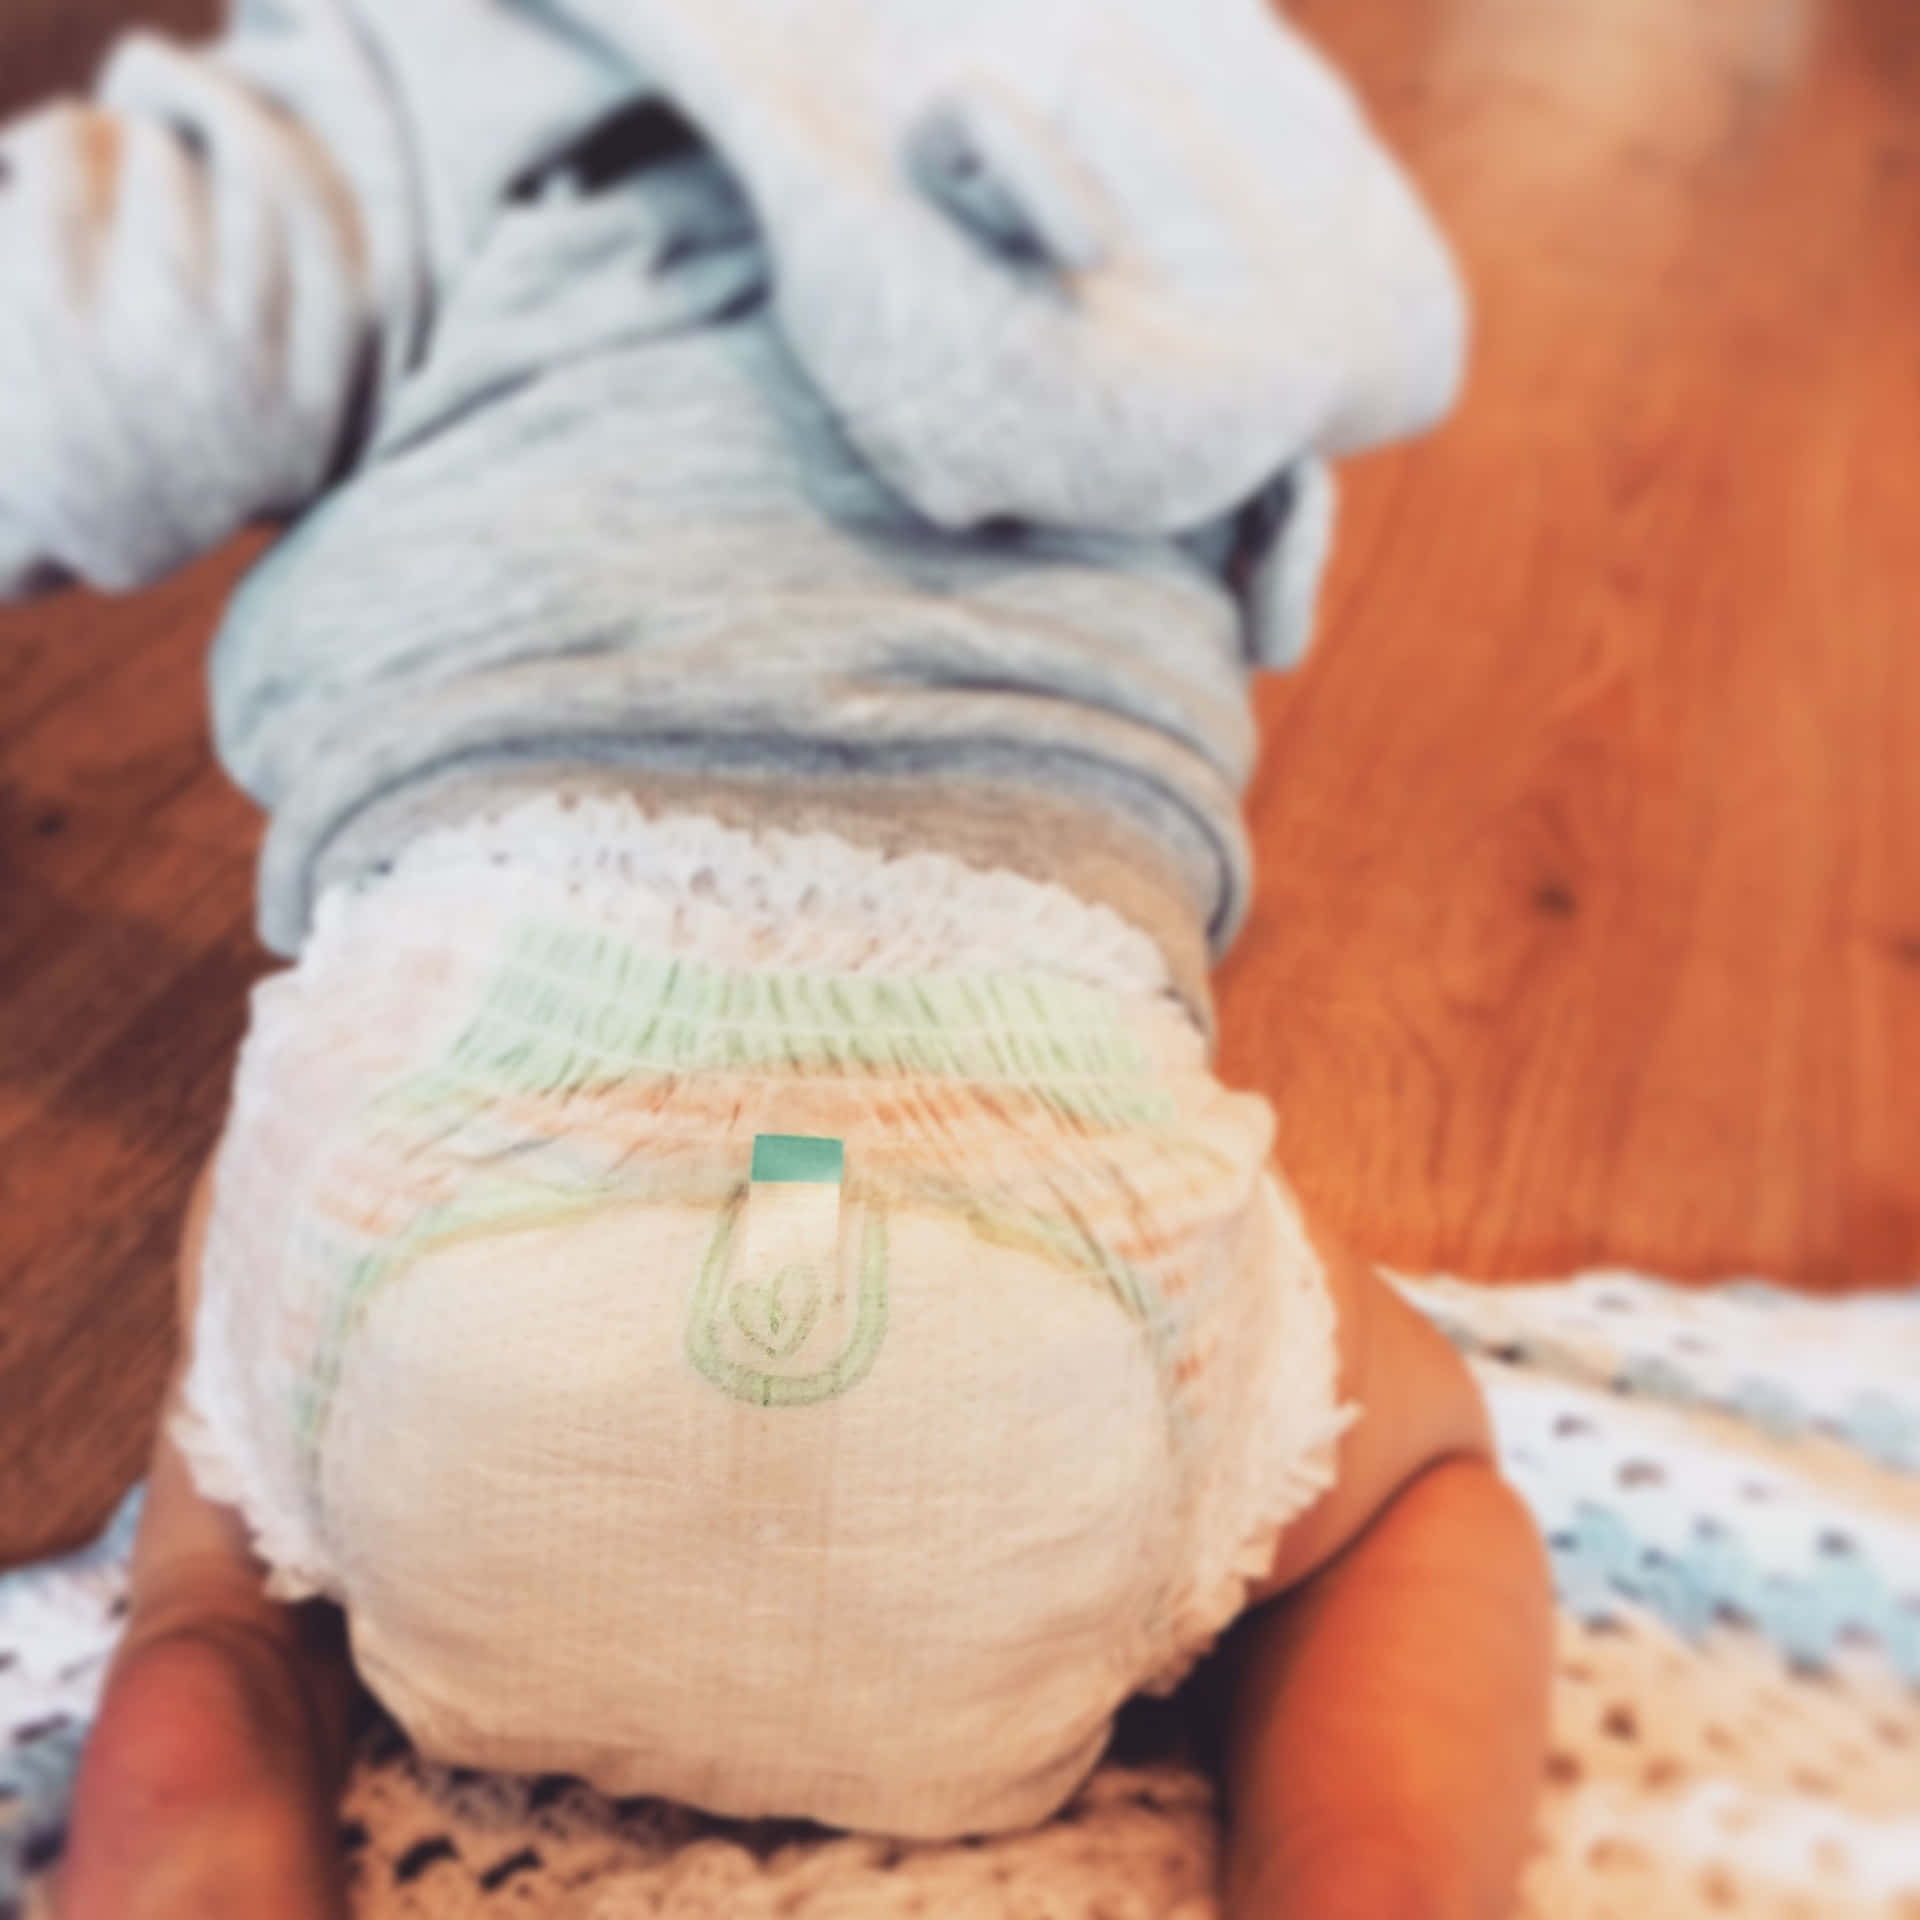 Keeping Your Baby Comfortable&Happy Includes Using Diapers